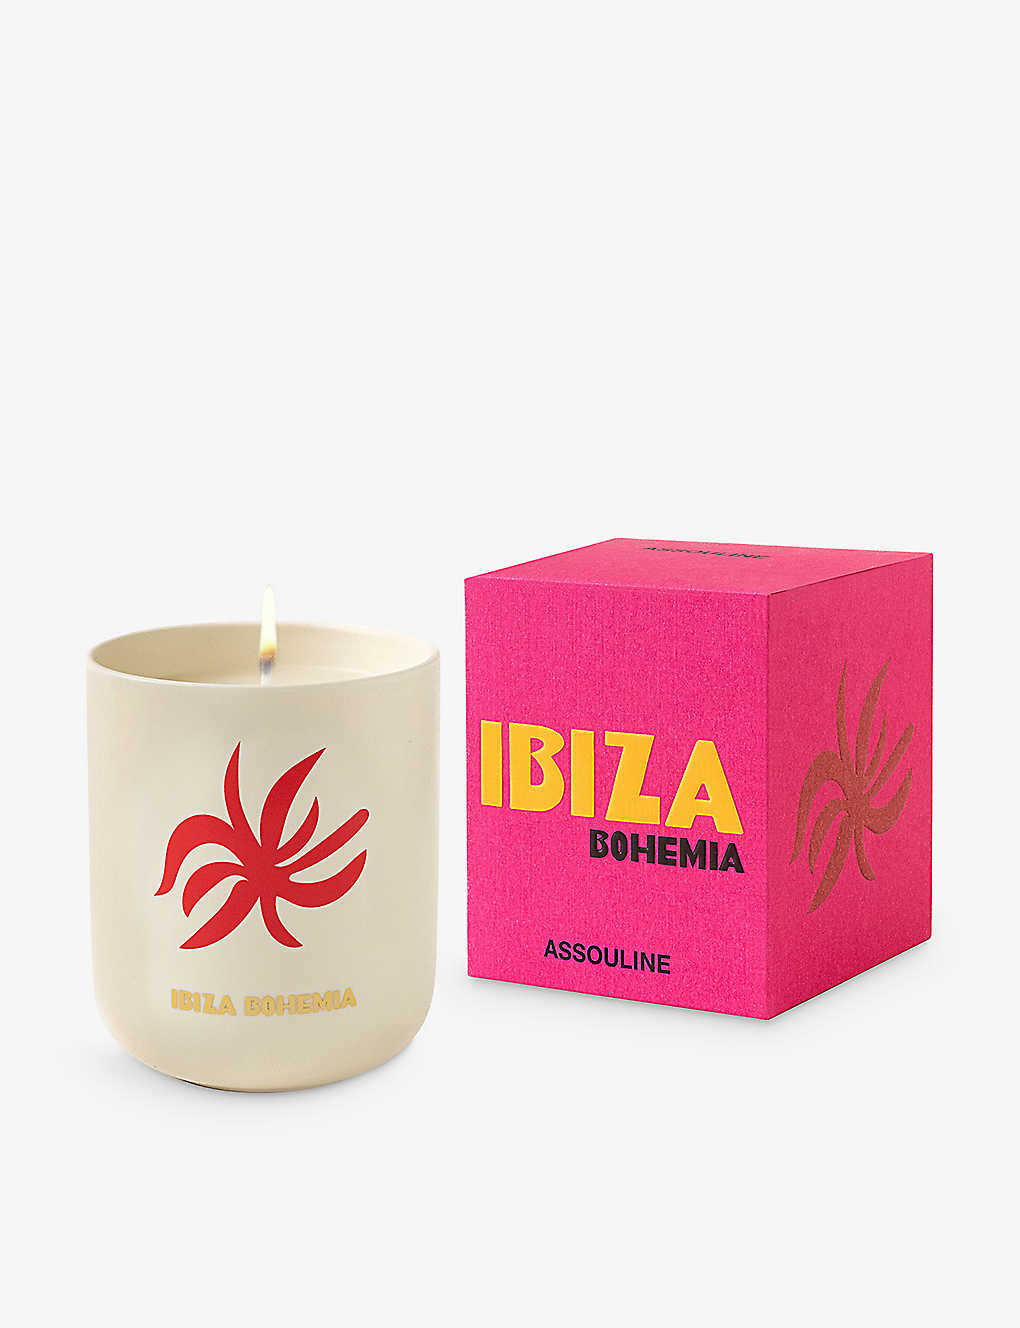 Shop Assouline Creme Travel From Home Ibiza Bohemia Wax Travel Candle 319g